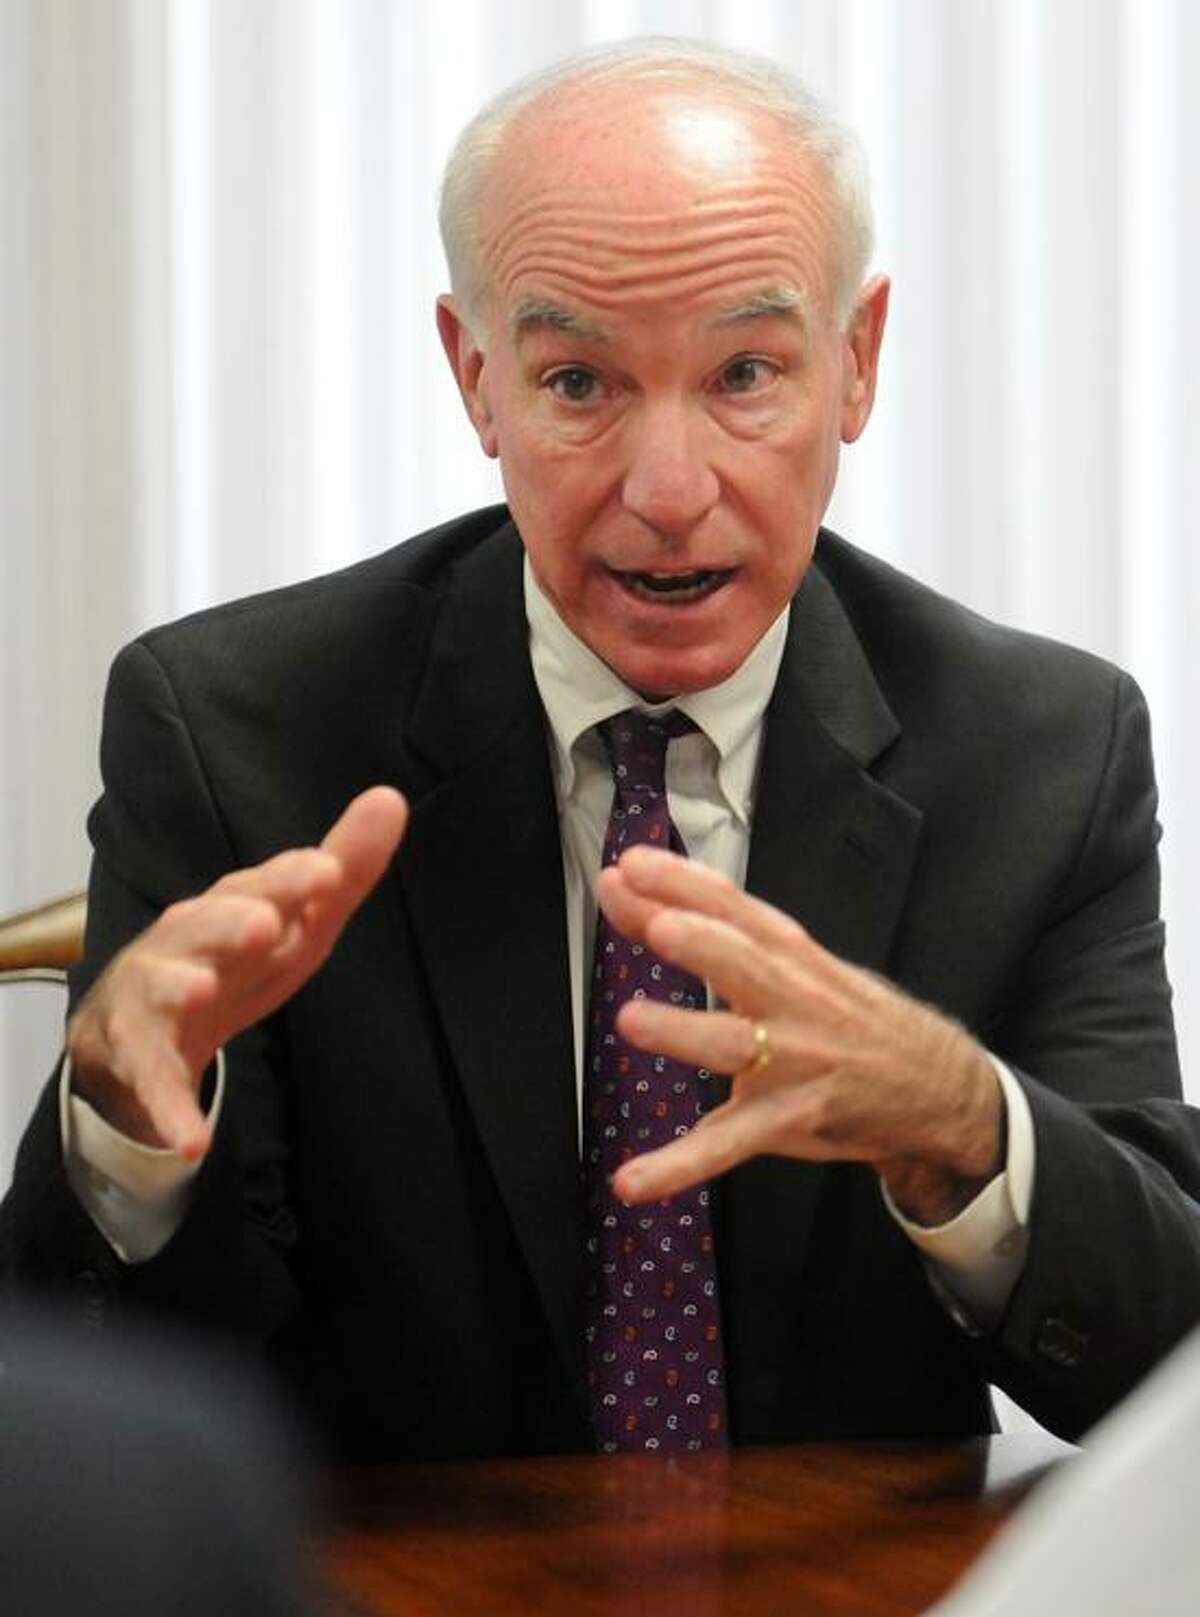 U.S. Rep. Joe Courtney, Democrat representing Connecticut's Second Congressional District, during an interview with the New Haven Register Editorial Board at the New Haven Register. Photo by Peter Hvizdak / New Haven Register